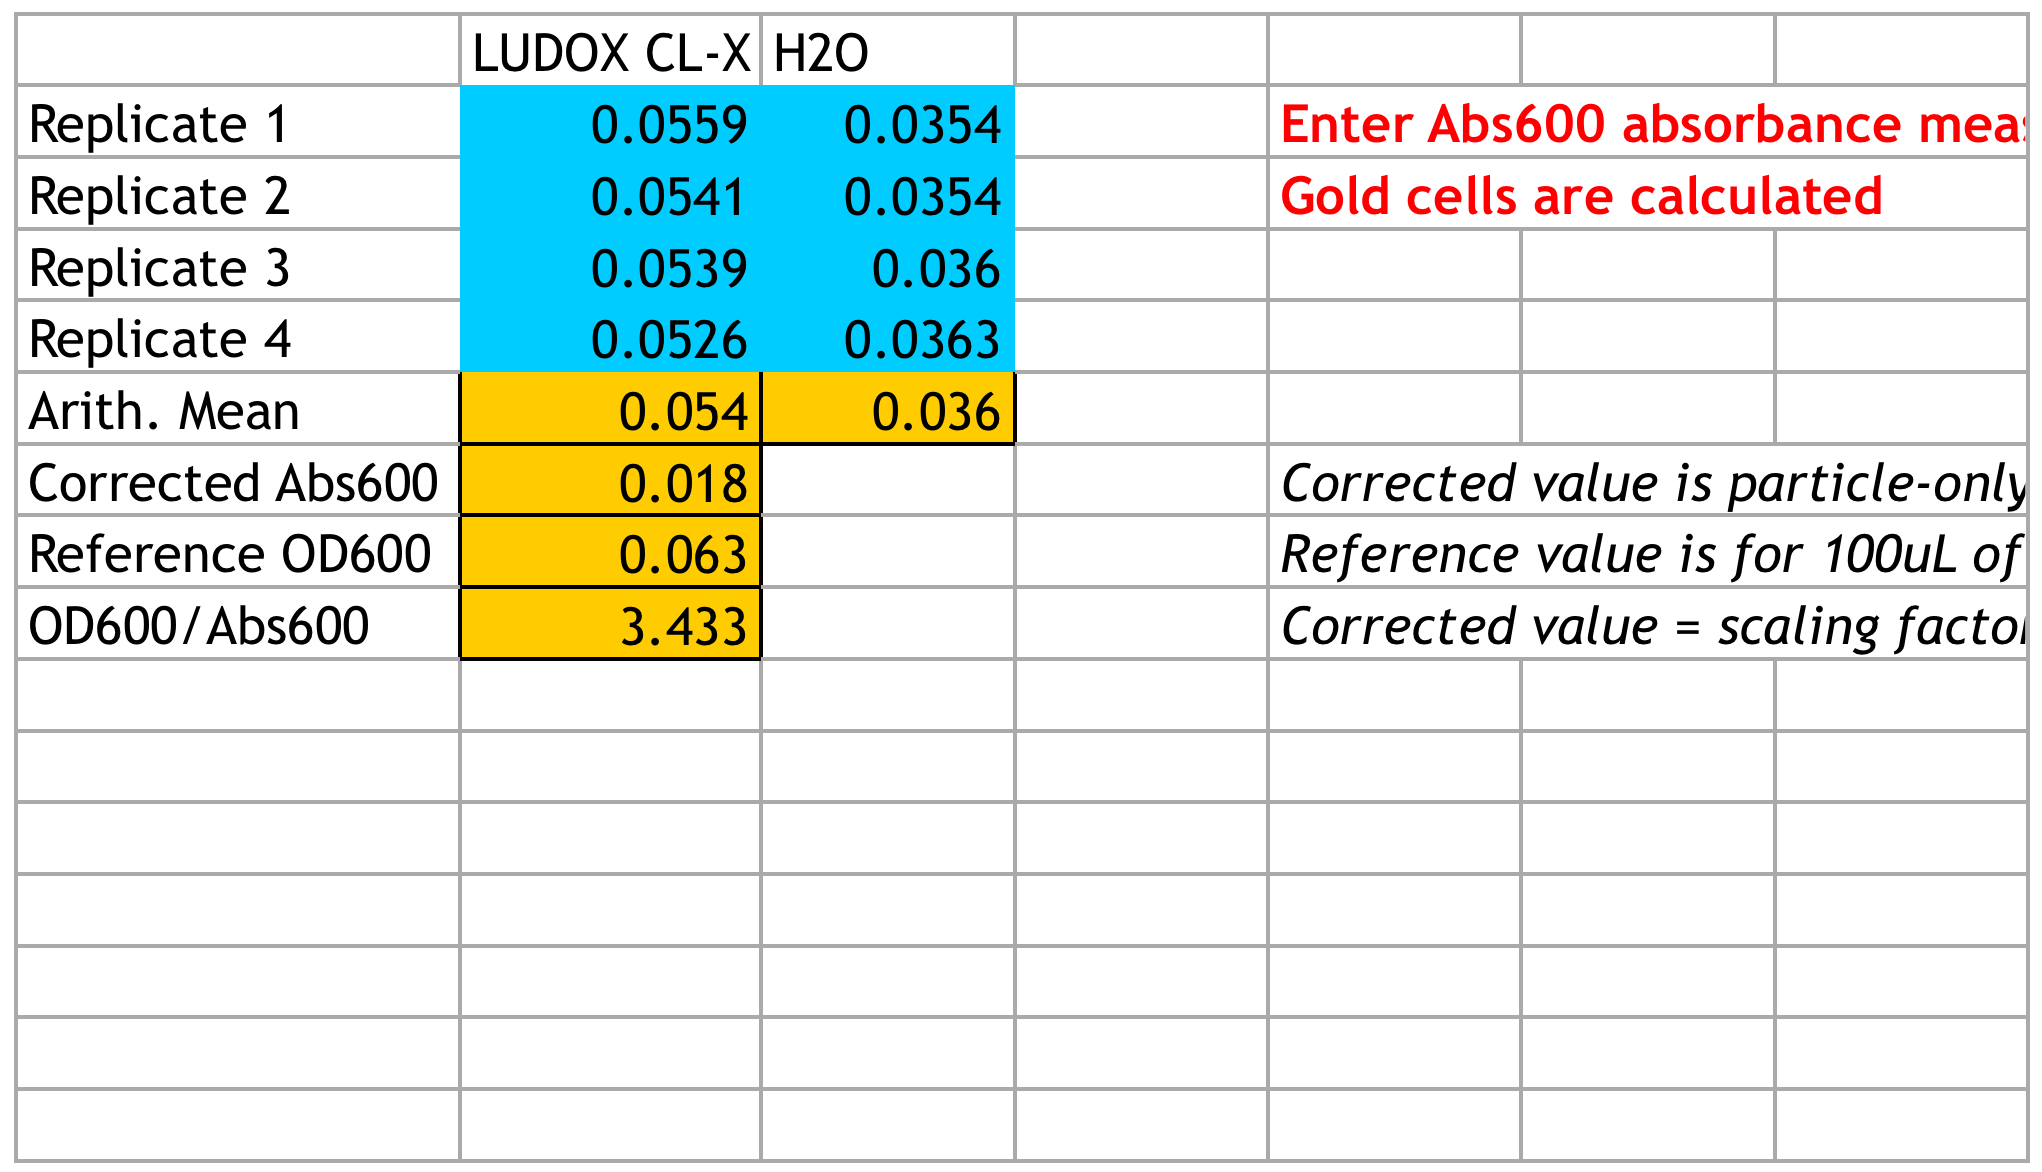 Our LUDOX data